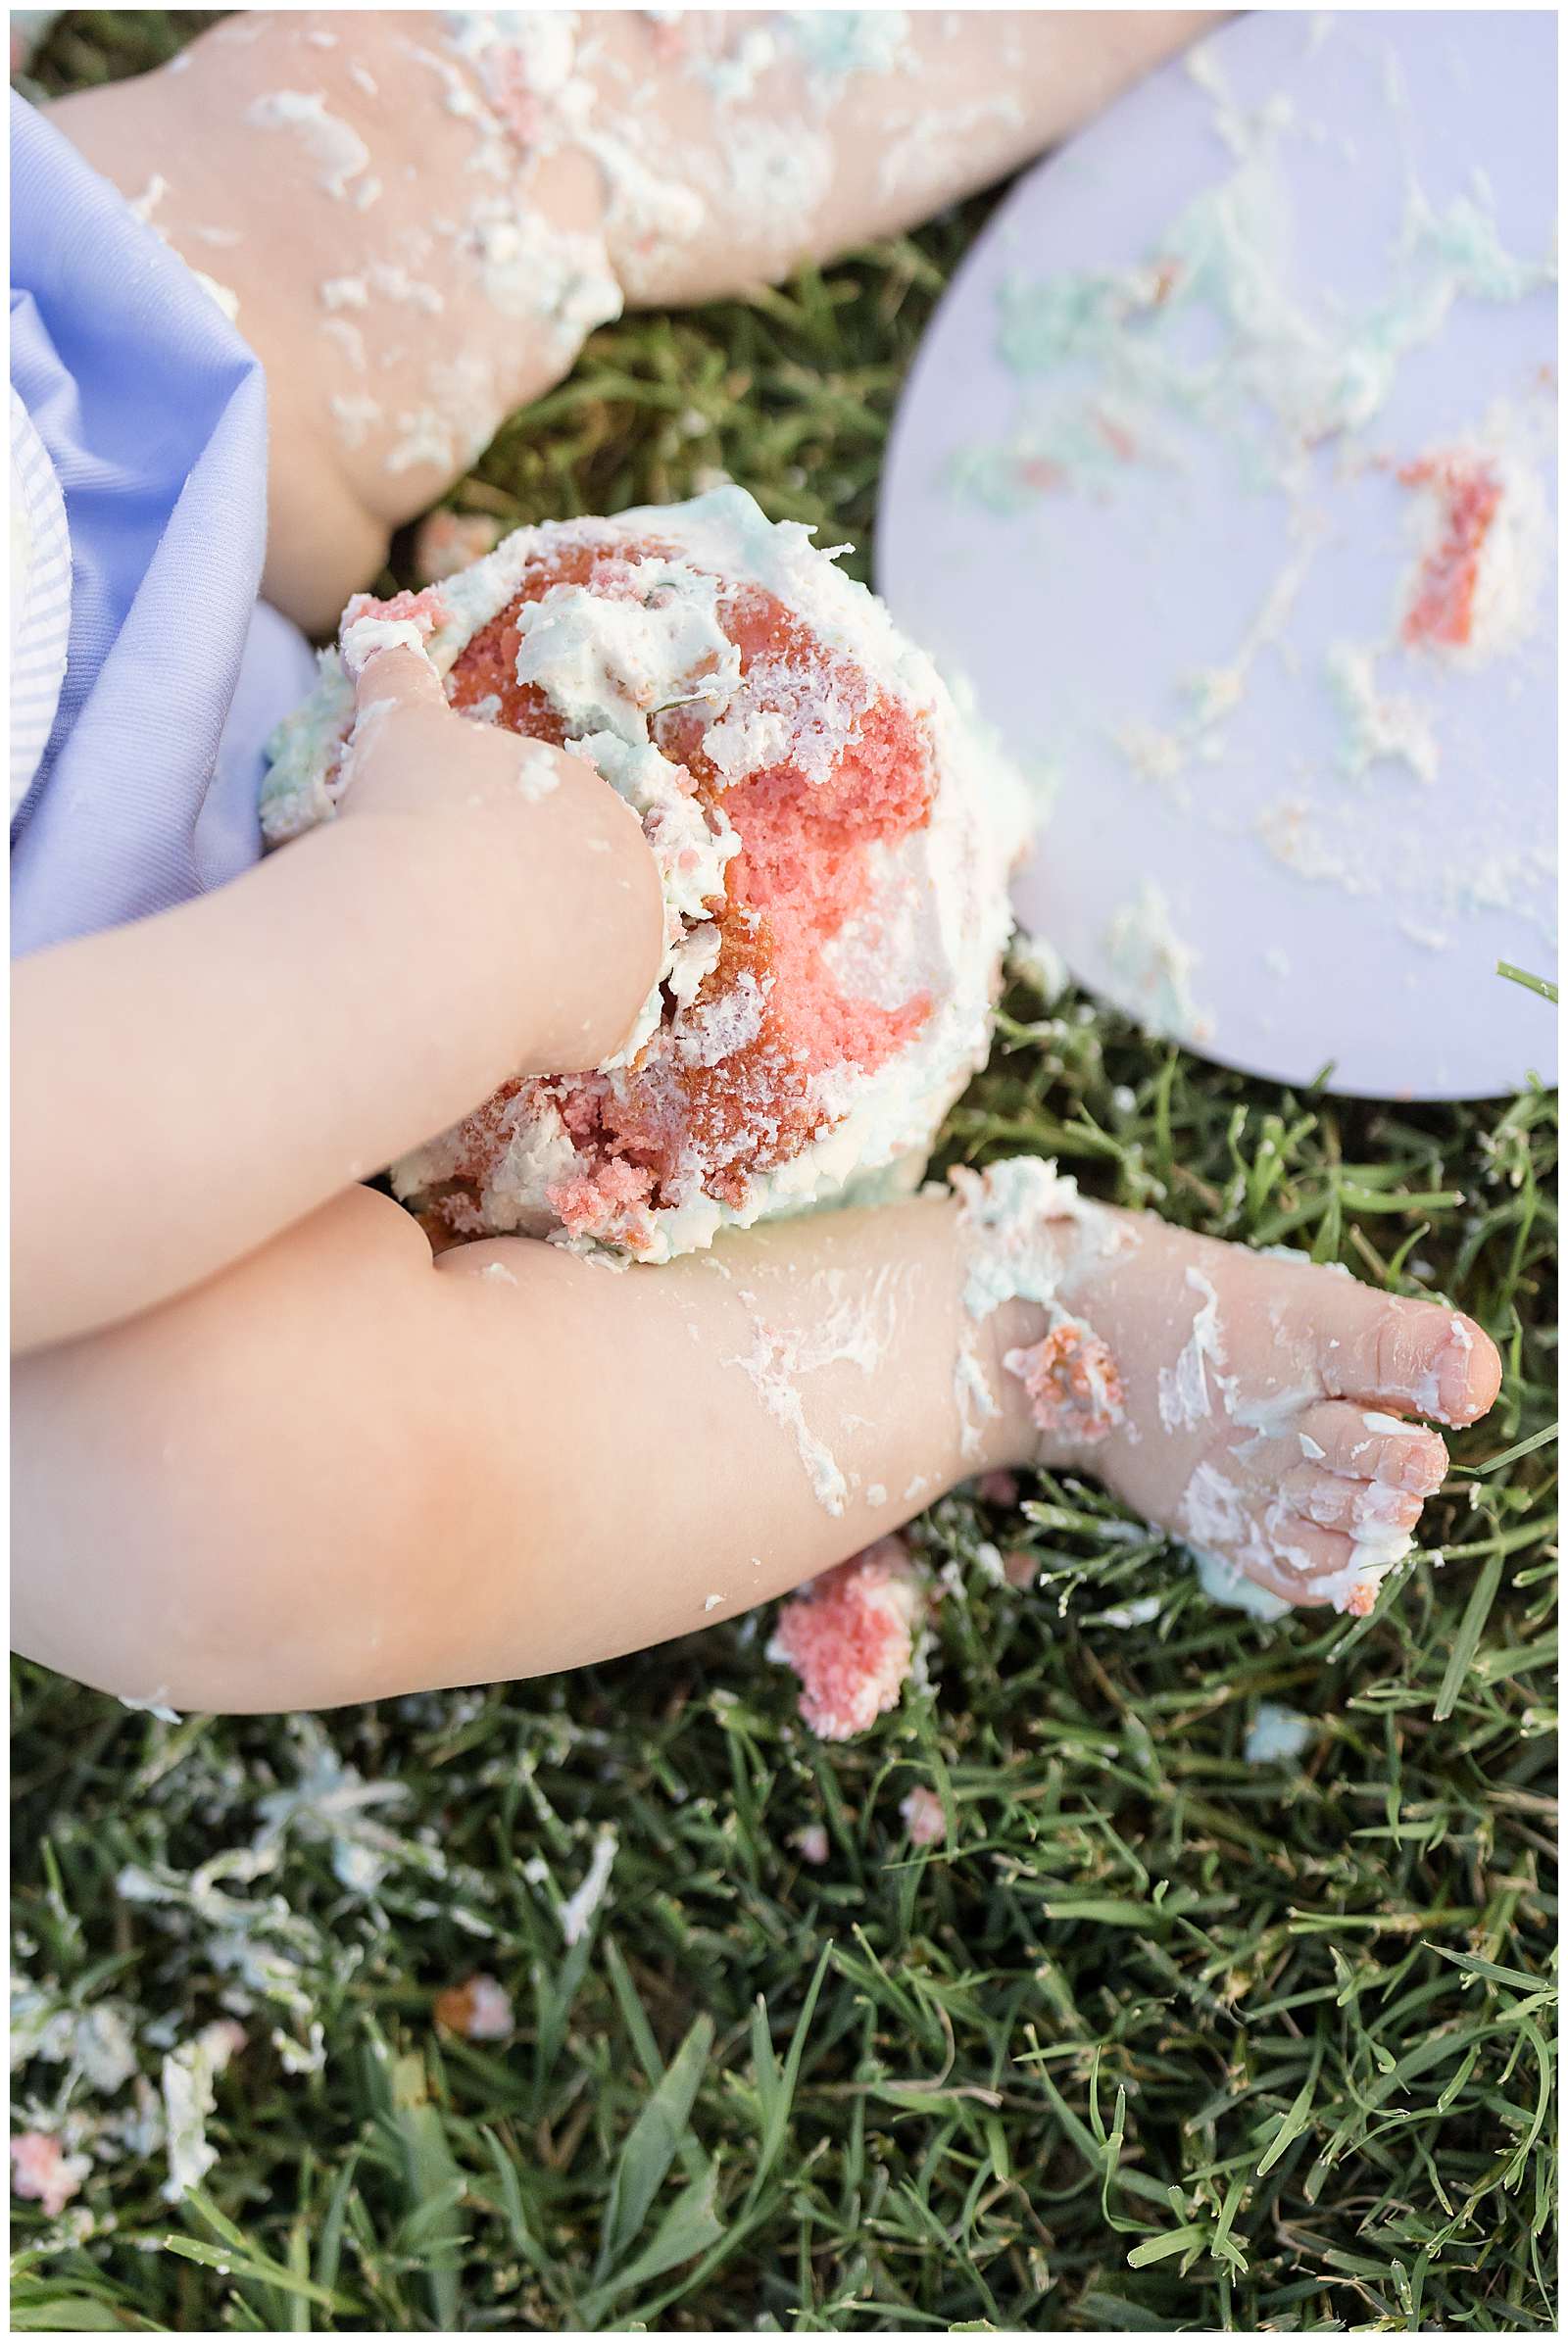 Detail image of baby's hand in their strawberry cake with vanilla icing smash cake and one foot of baby toes covered in icing.